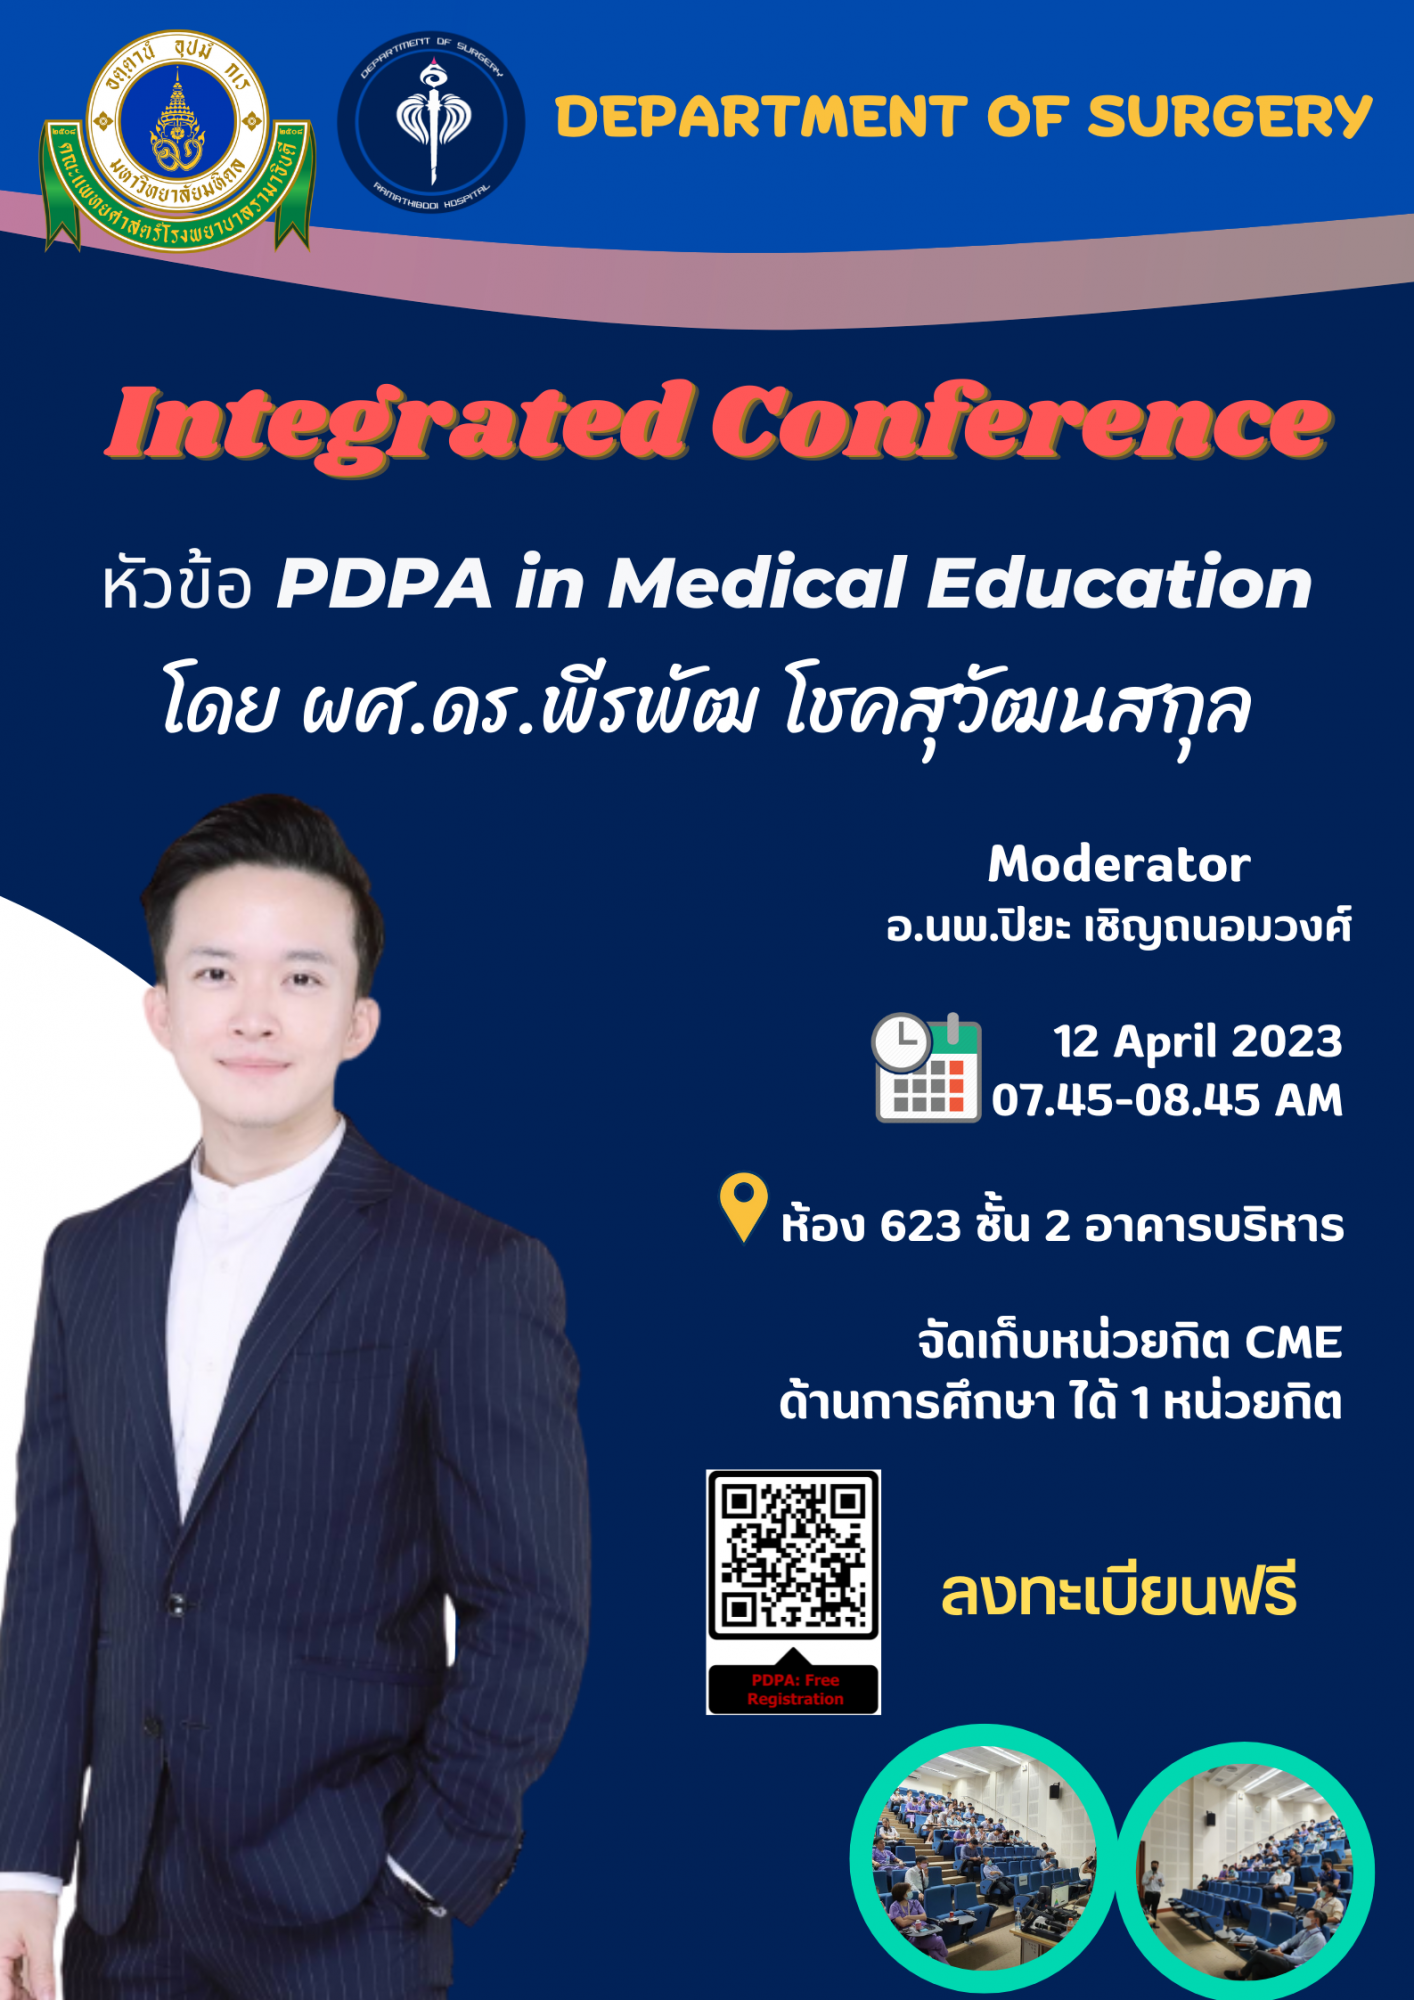 Integrated Conference: "PDPA in Medical Education"